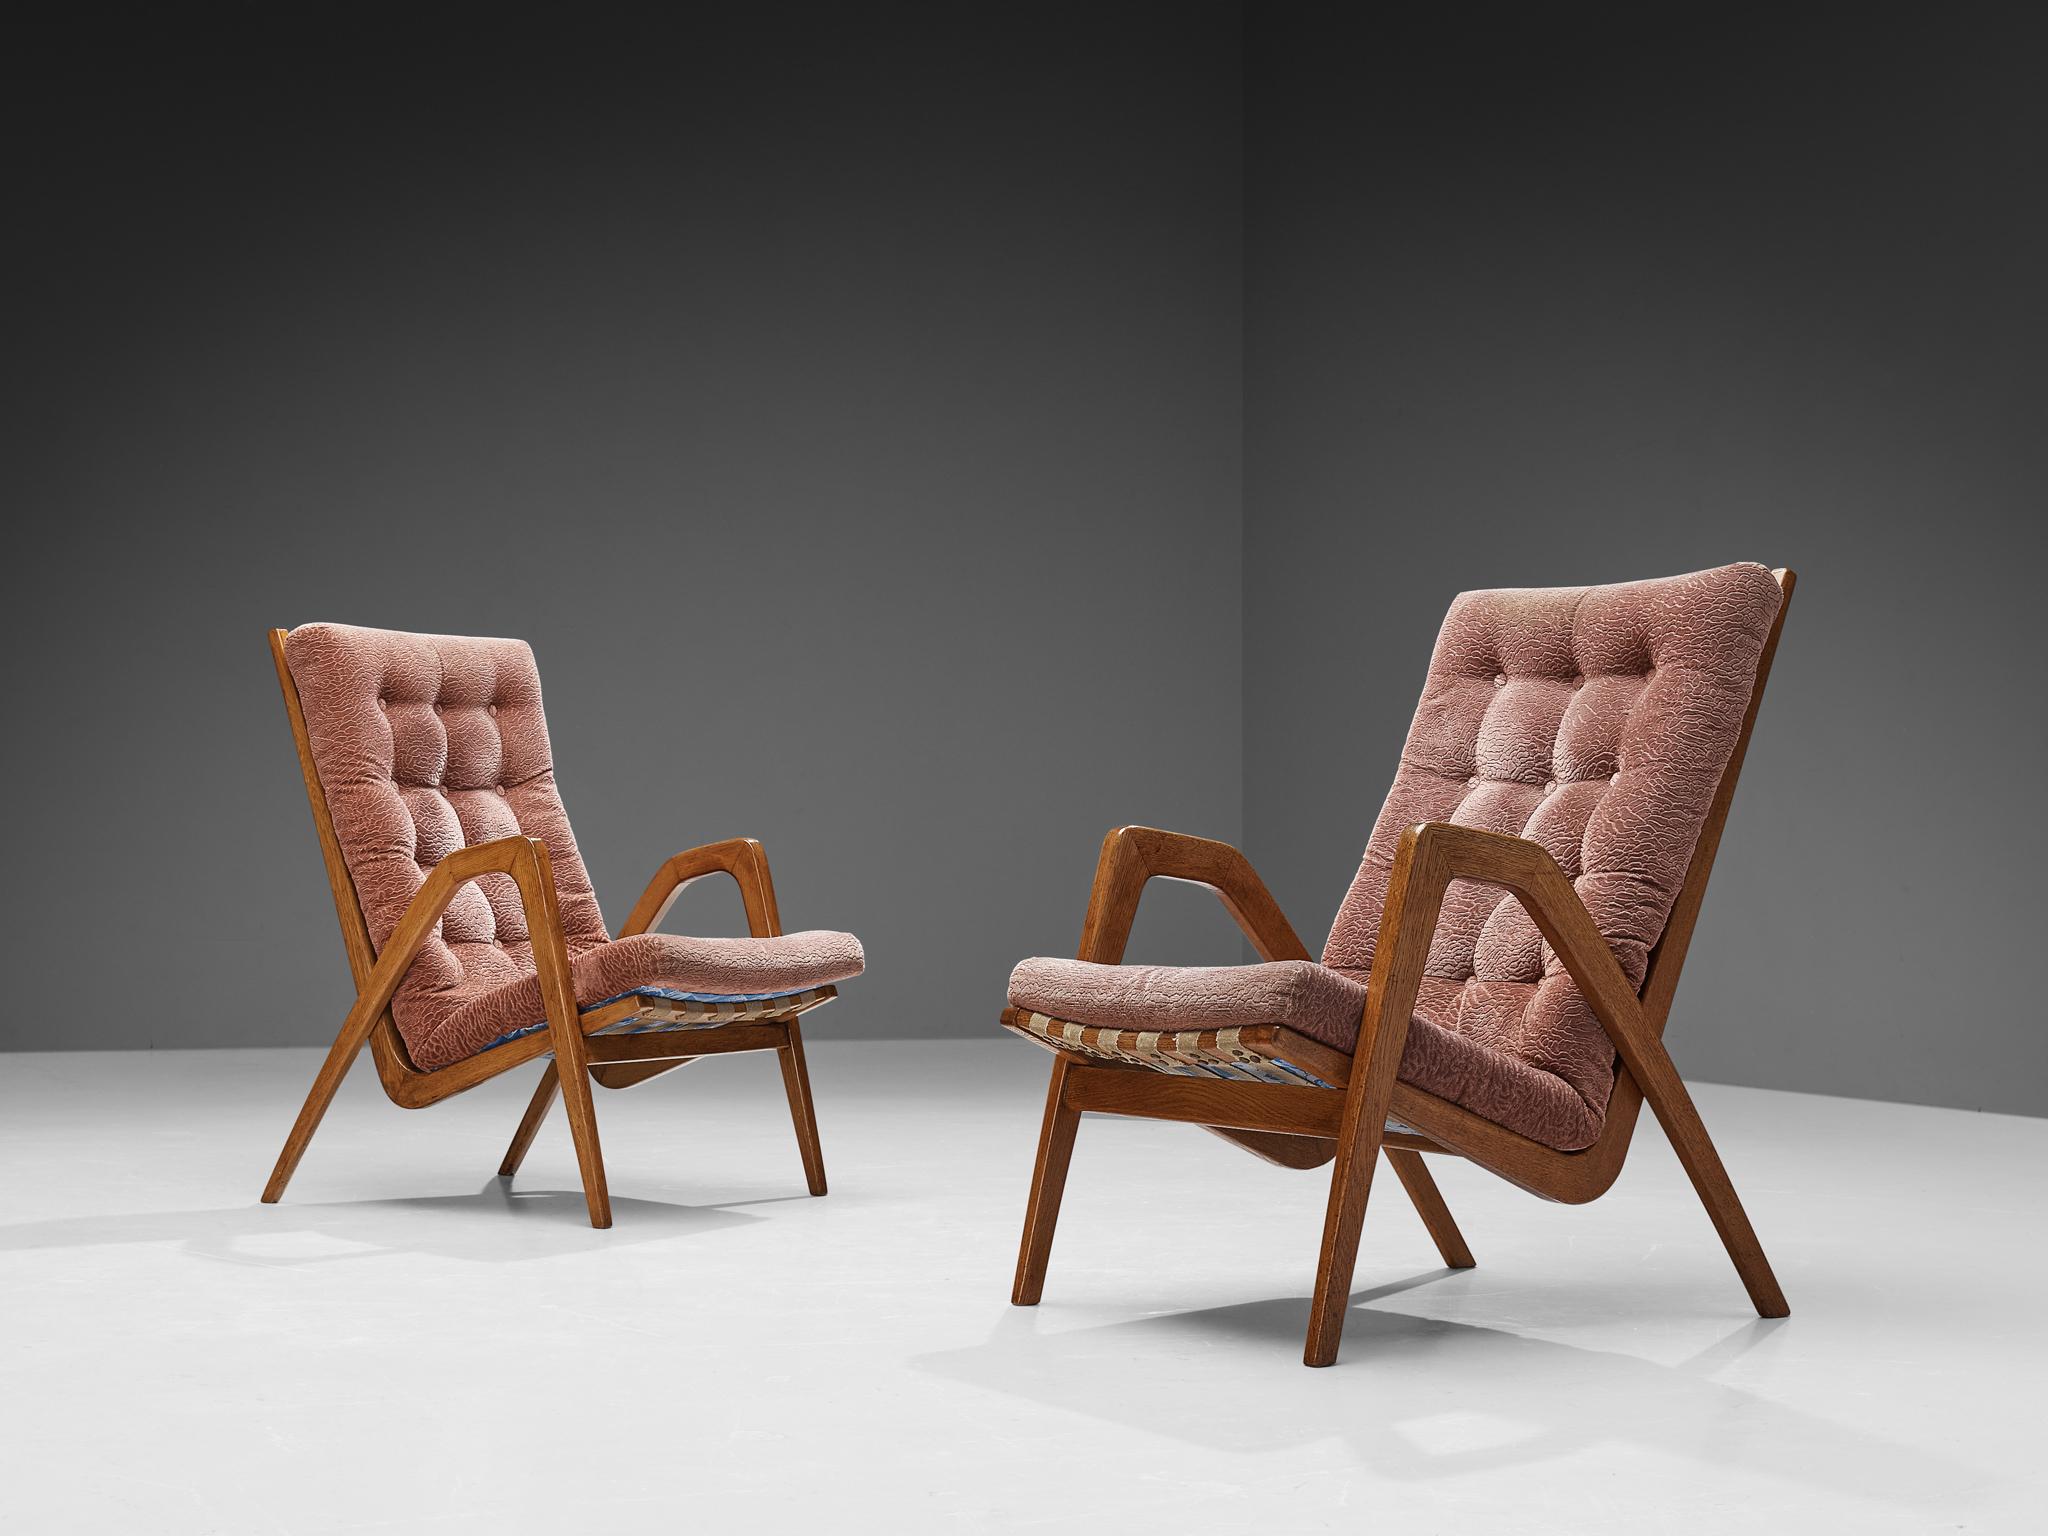 Pair of lounge chairs, oak, fabric, Europe, 1950s

Refined pair of lounge chairs that feature high backrests. The chairs are from late Art Deco period, as they show its distinctive characteristics, such as the thick tufted seat and the sculpted oak